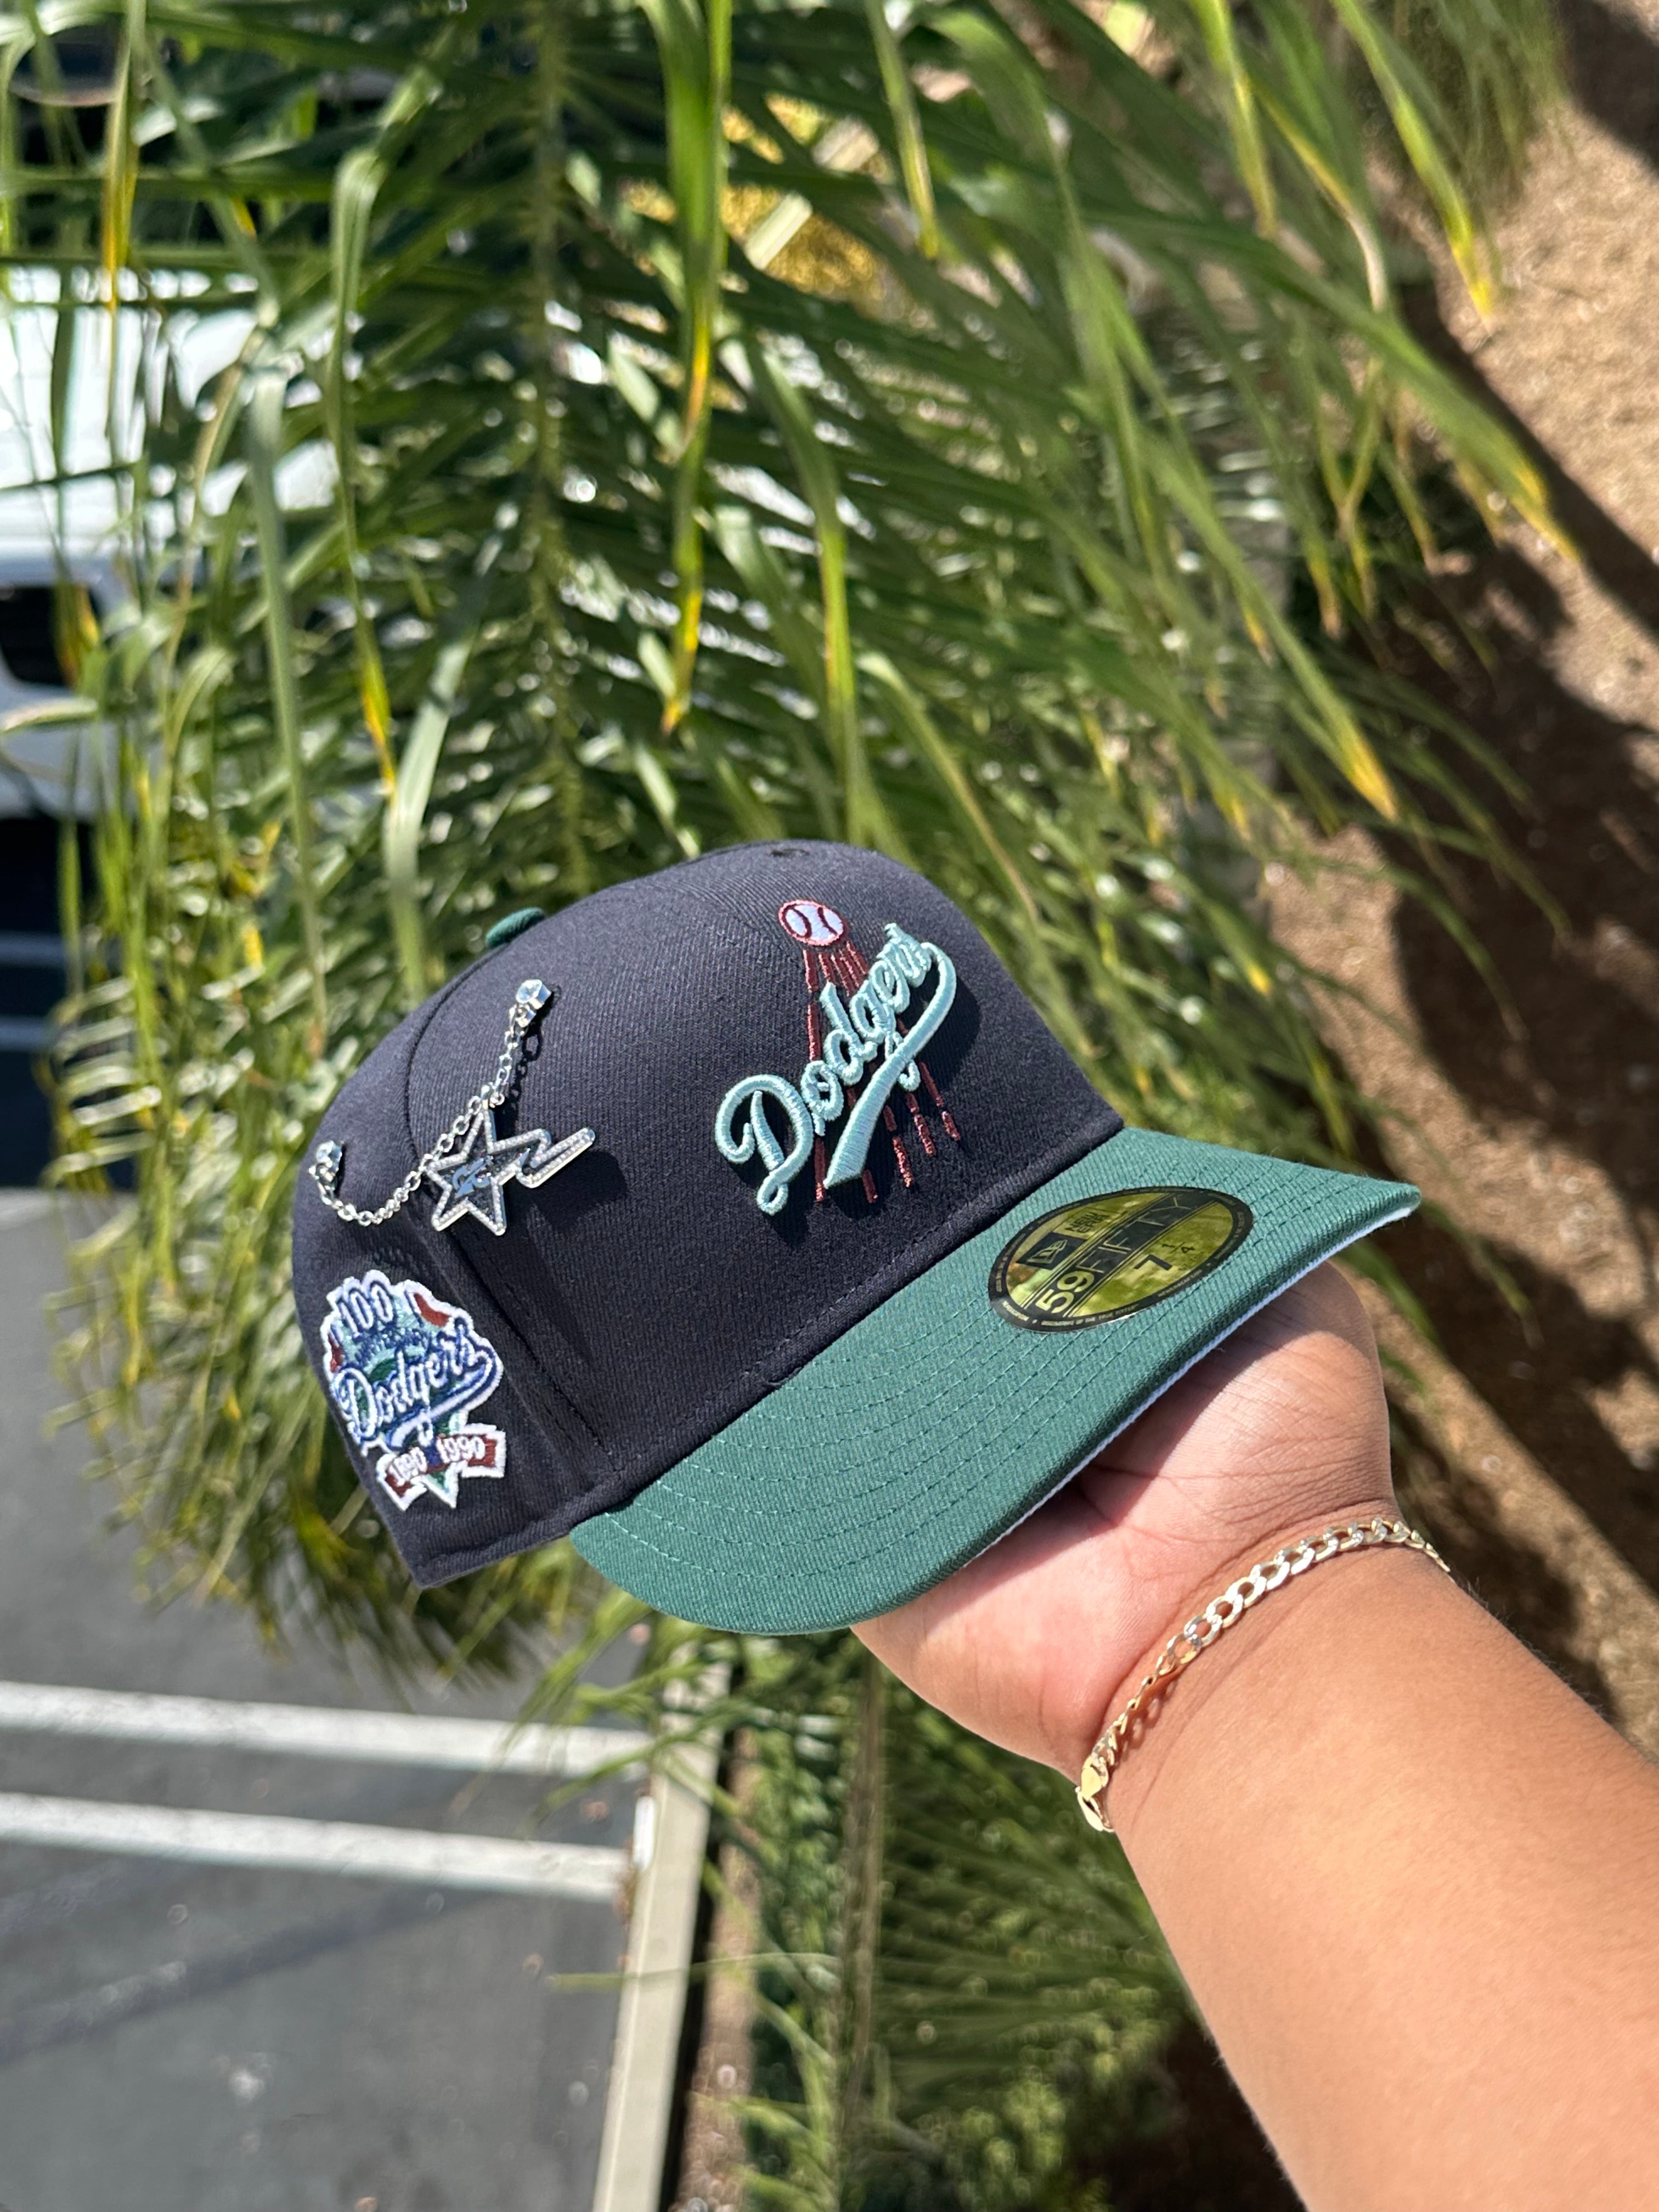 NEW ERA EXCLUSIVE 59FIFTY NAVY/FOREST GREEN LOS ANGELES DODGERS W/ 100TH ANNIVERSARY PATCH